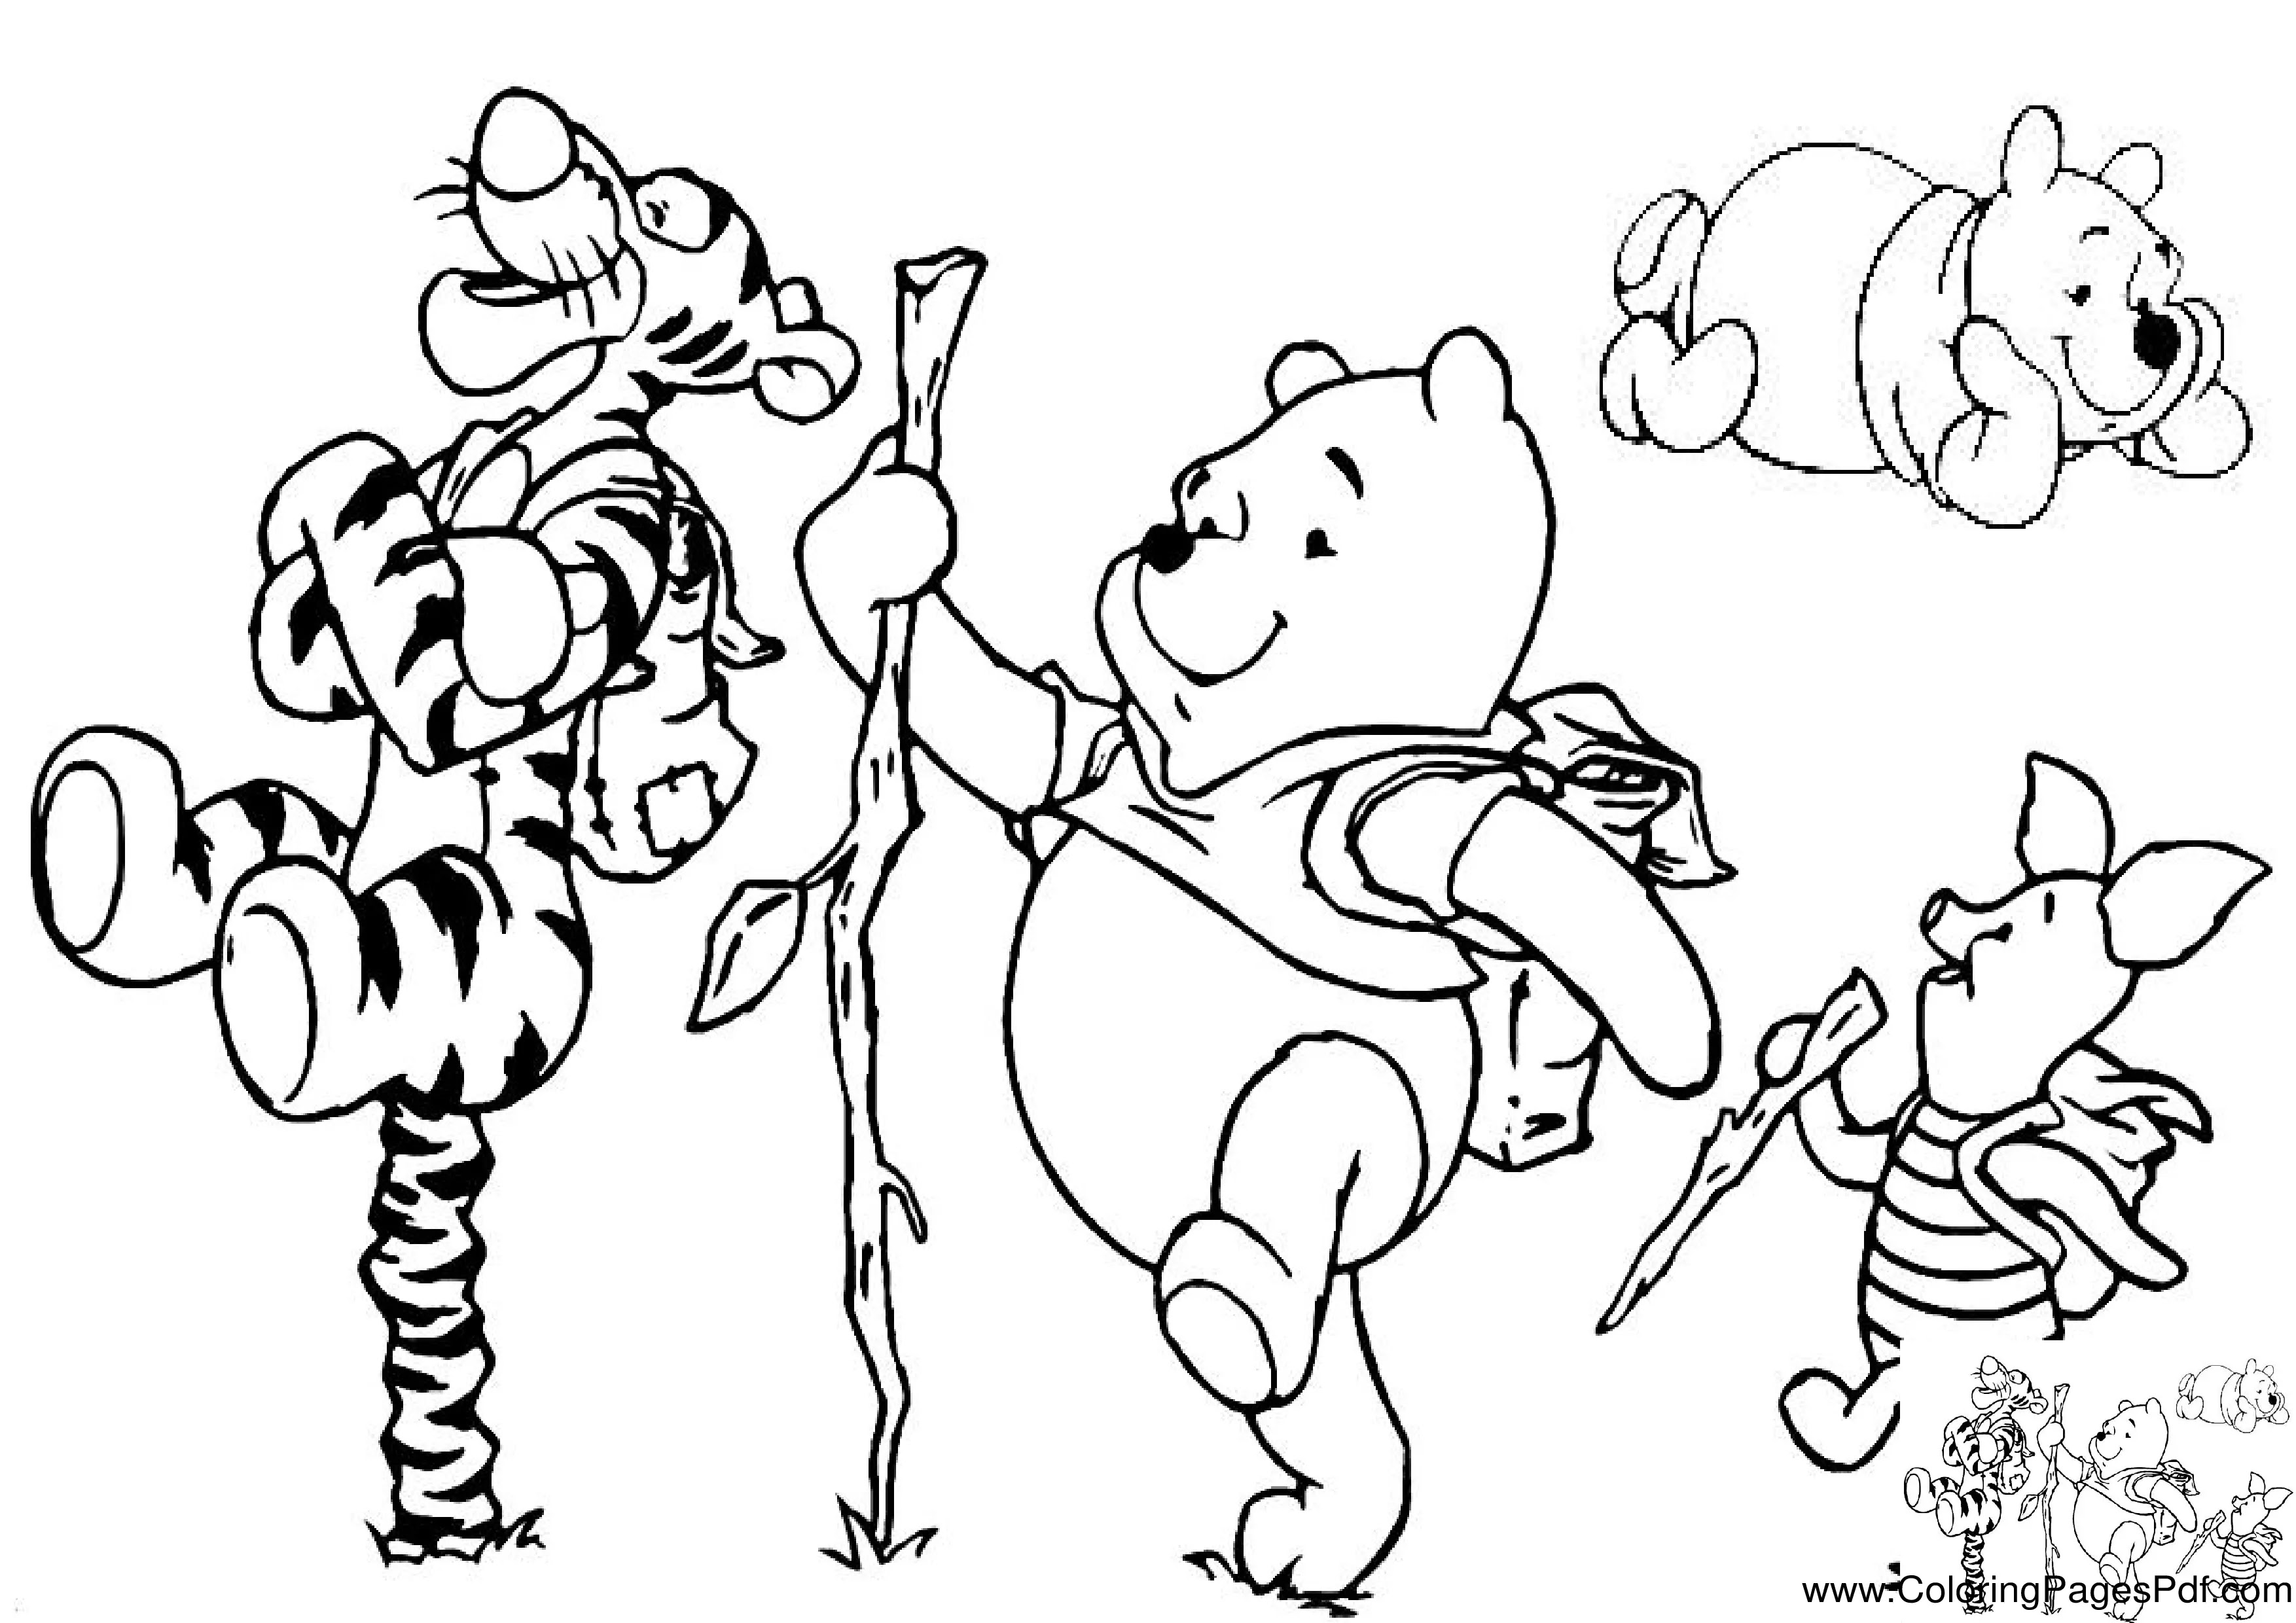 Winnie the pooh coloring pages baby